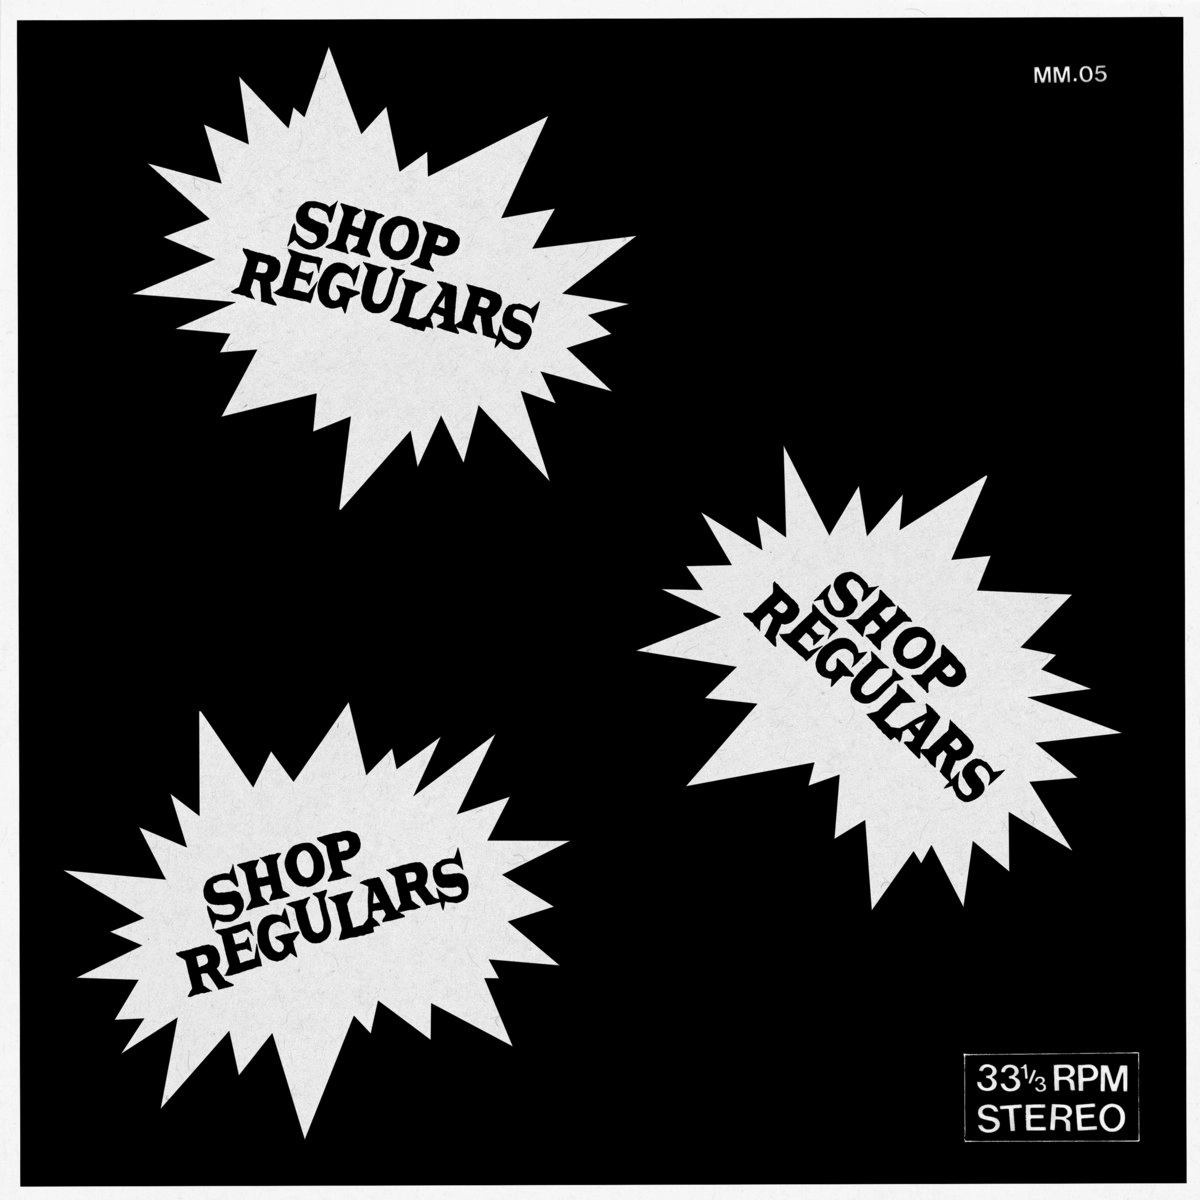 the cover art for the shop regulars self-titled. a black background with the words 'shop regulars' placed three times in spikey white clouds